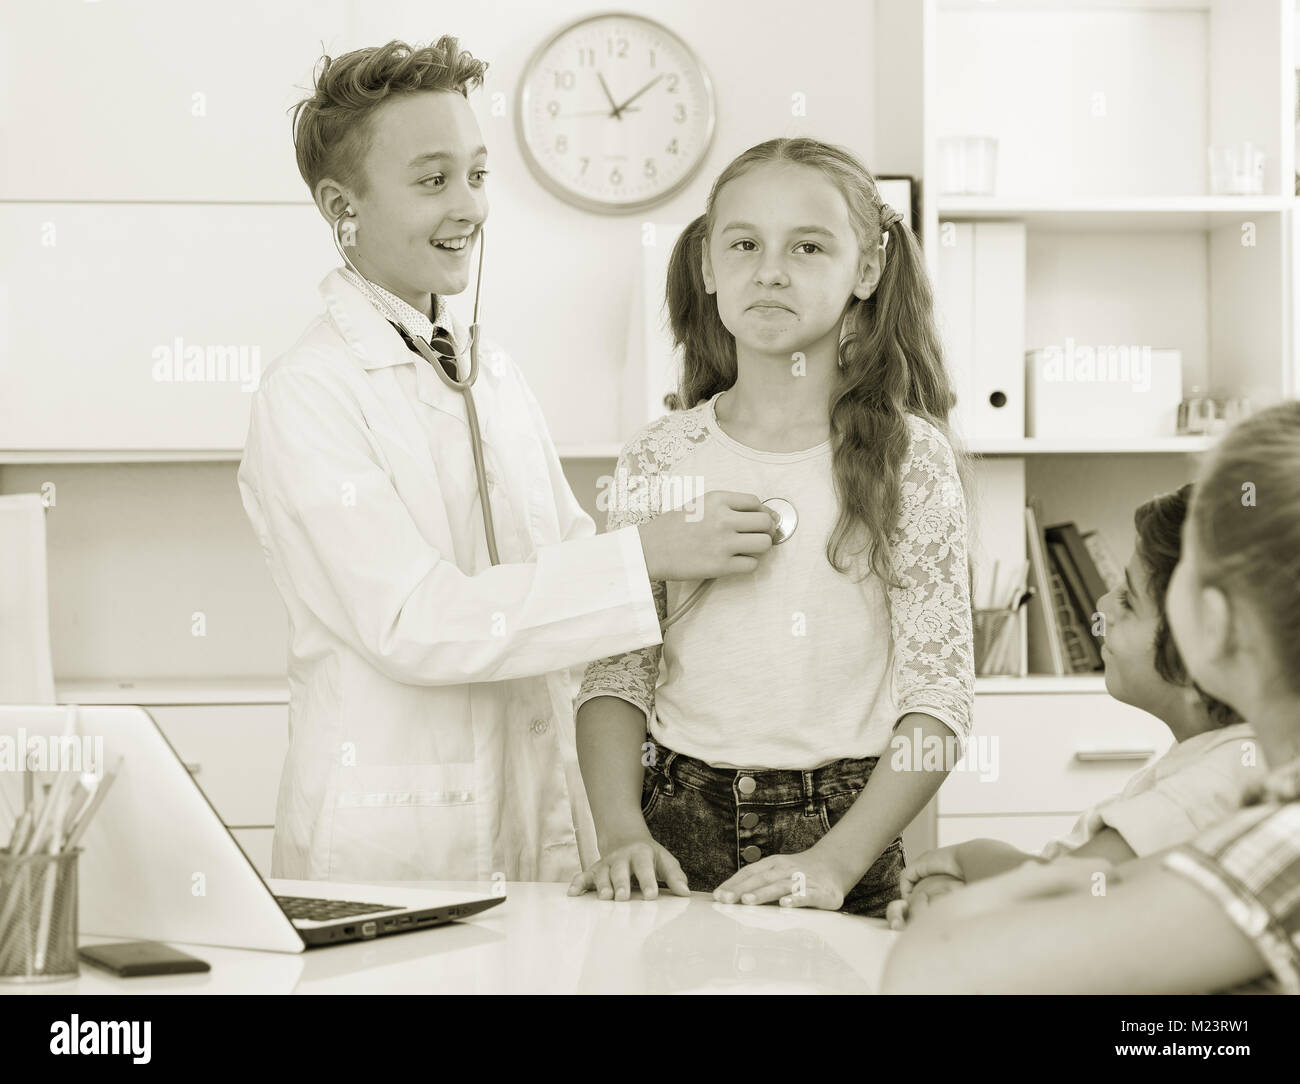 Young male doctor in uniform leading medical appointment with children Stock Photo